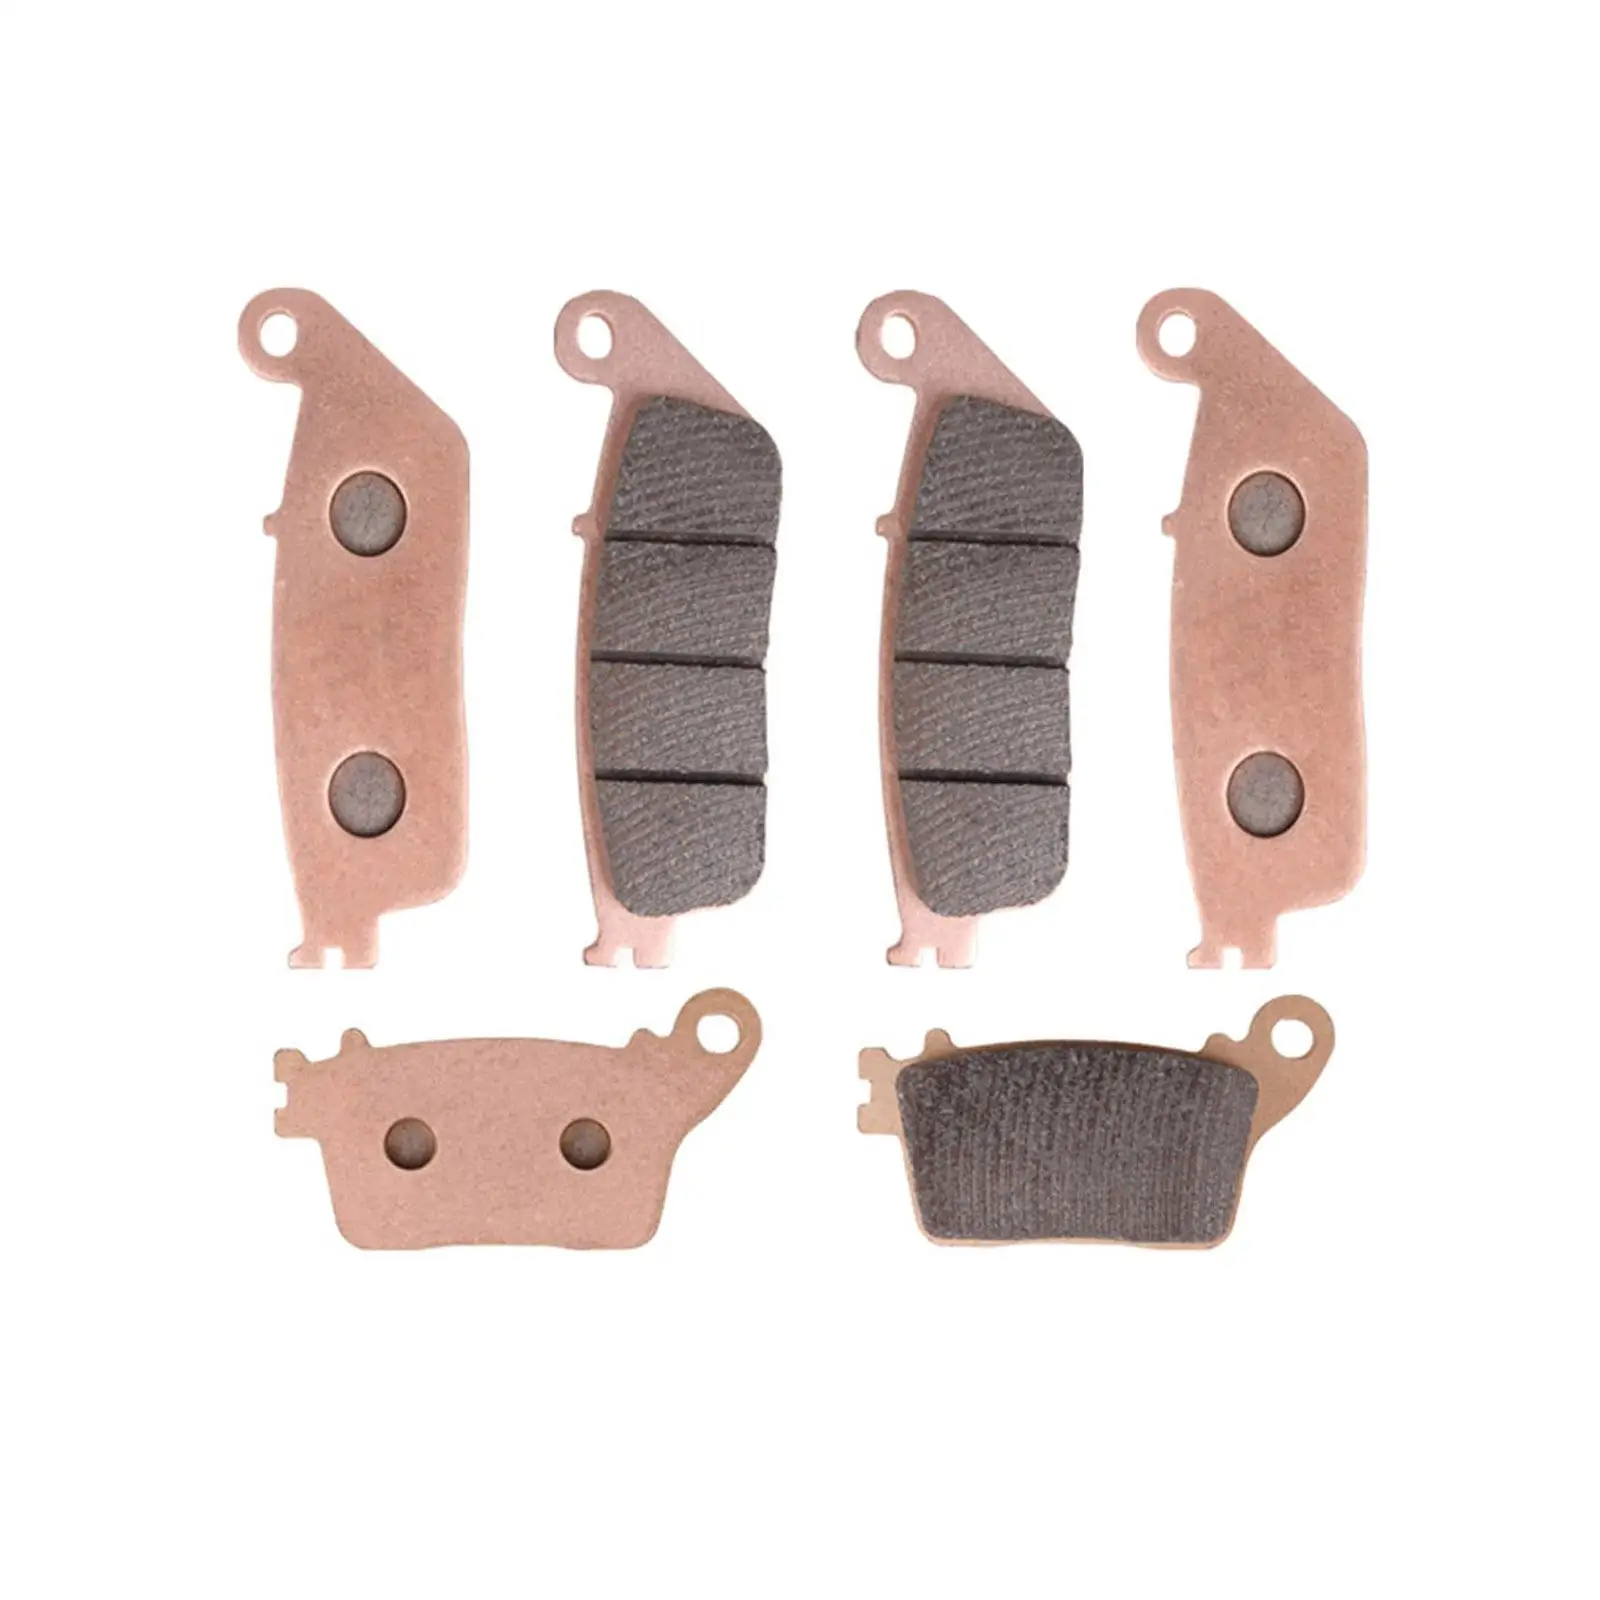 6x Front and Rear Brake Pads Motorcycle Replacement Part for Honda